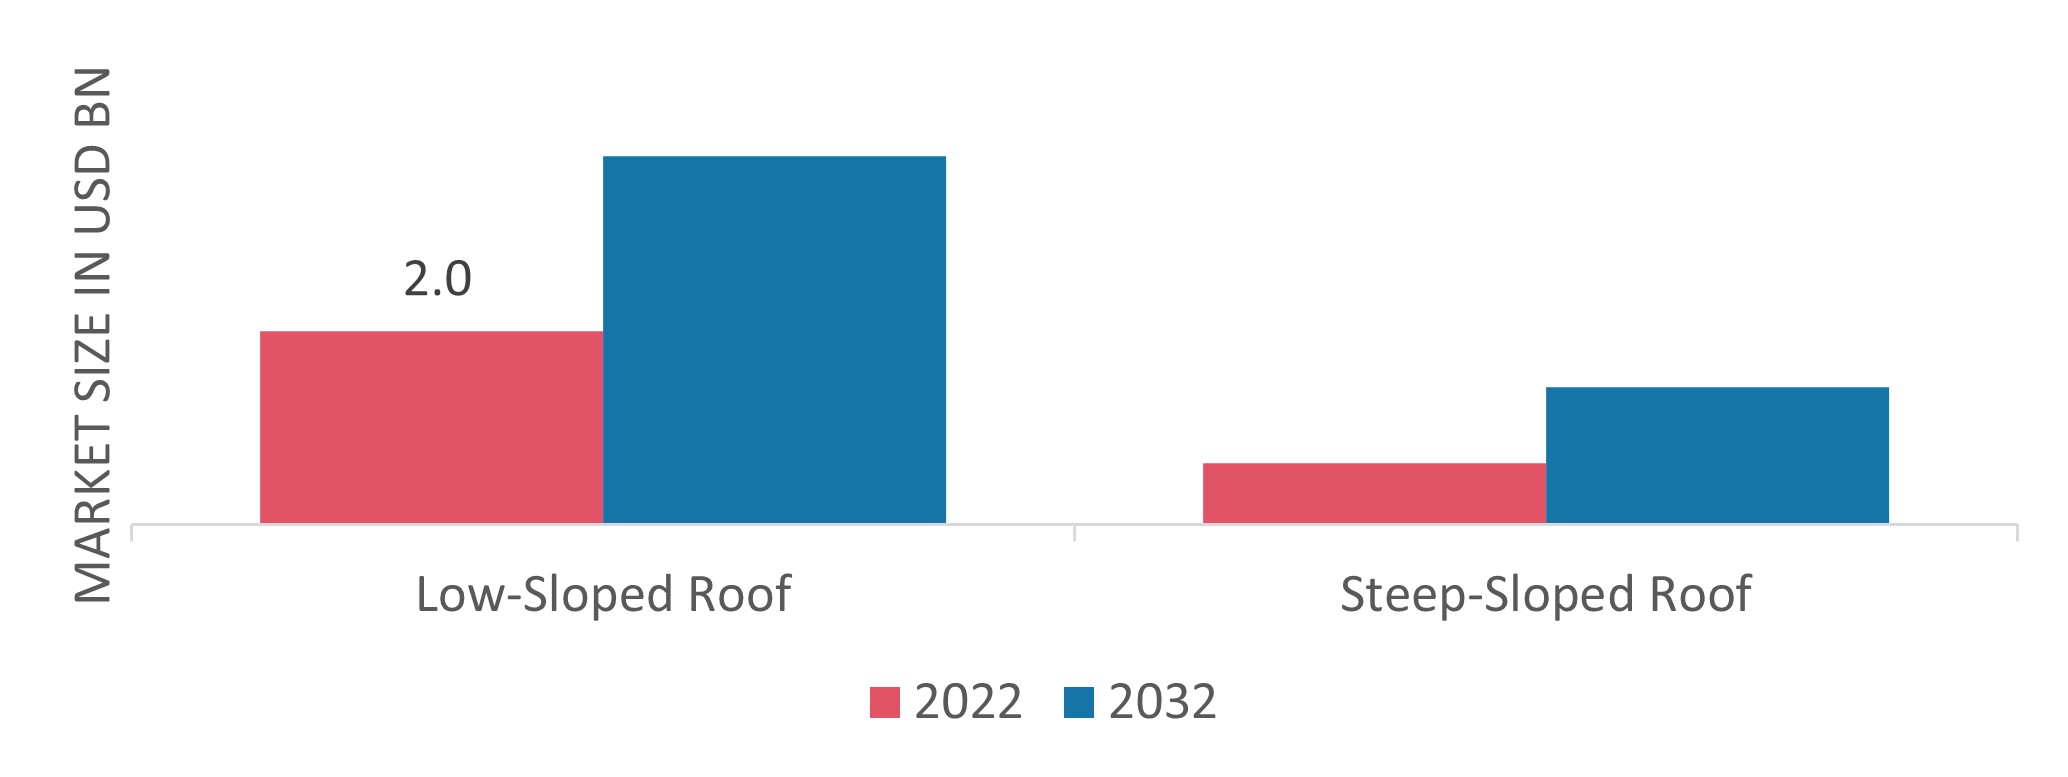 Cool Roof Coatings Market, by Roof Slope, 2022 & 2032